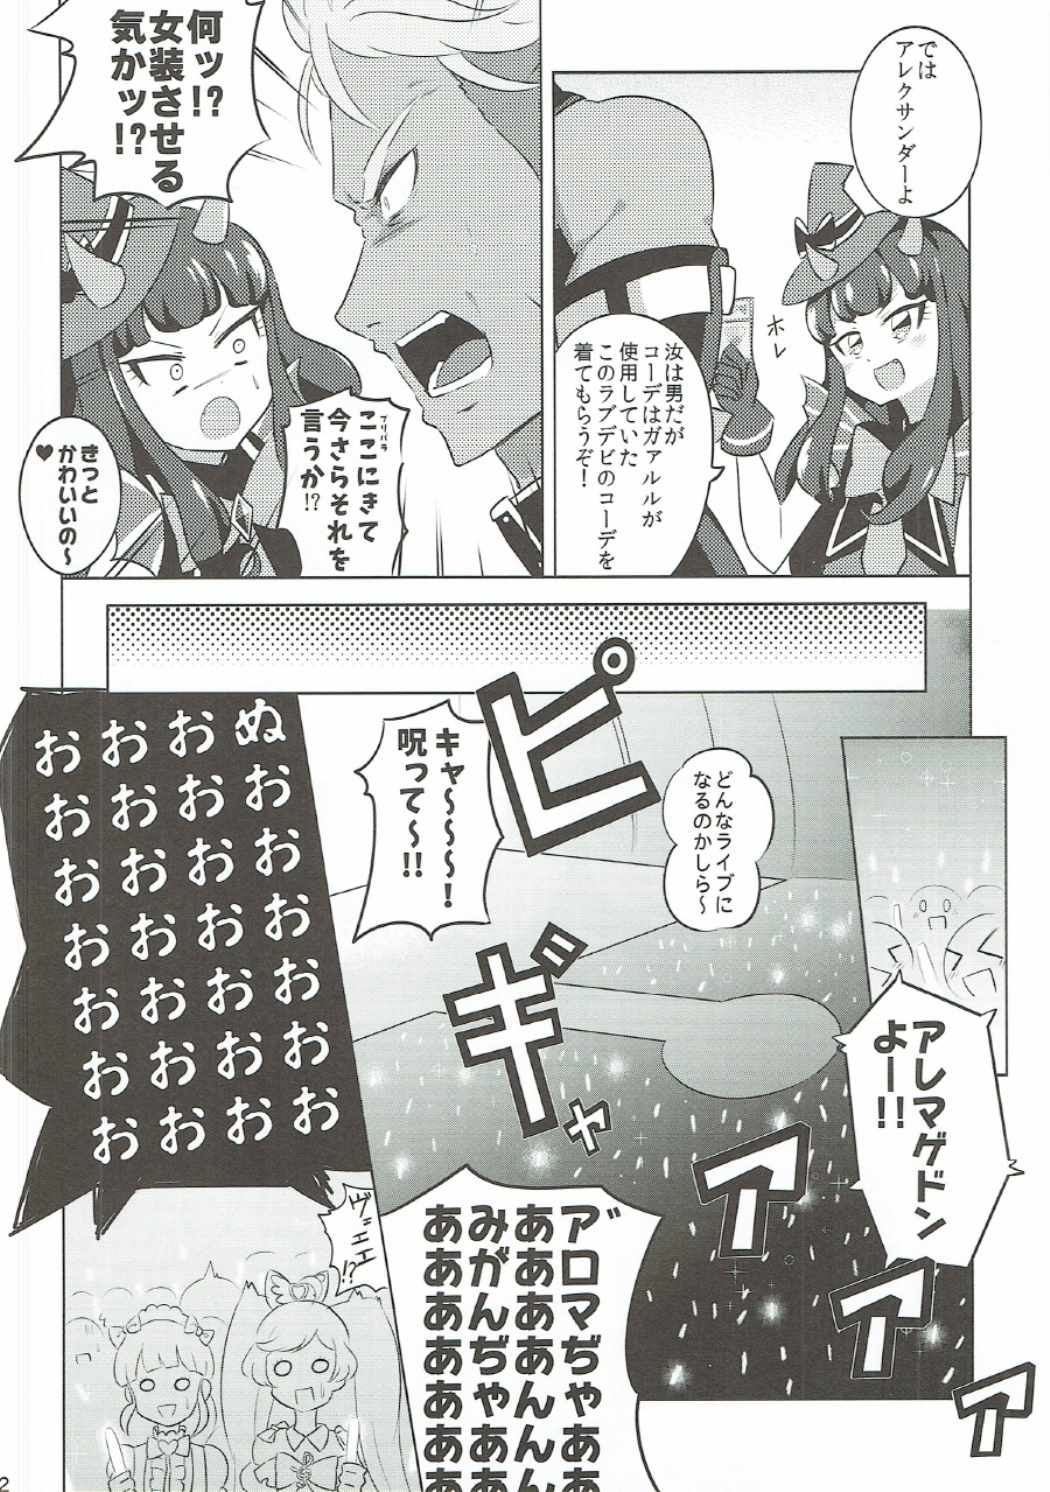 (On the Stage 5) [Gake no Ue no Aho (AHO)] The Gaarmagedon Times (PriPara) page 11 full